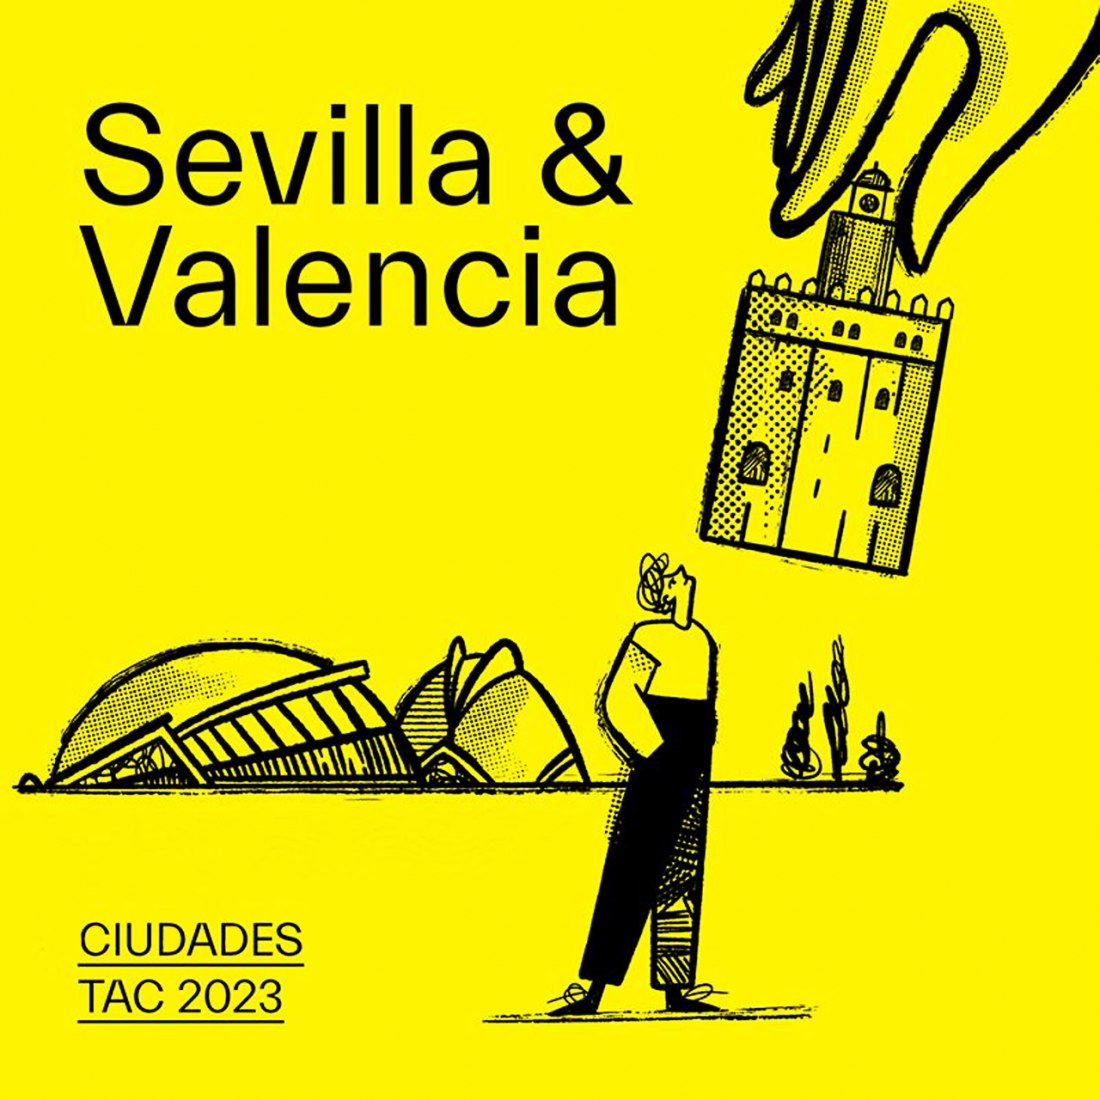 Seville and Valencia venues for the second edition of the urban architecture festival 'TAC!'